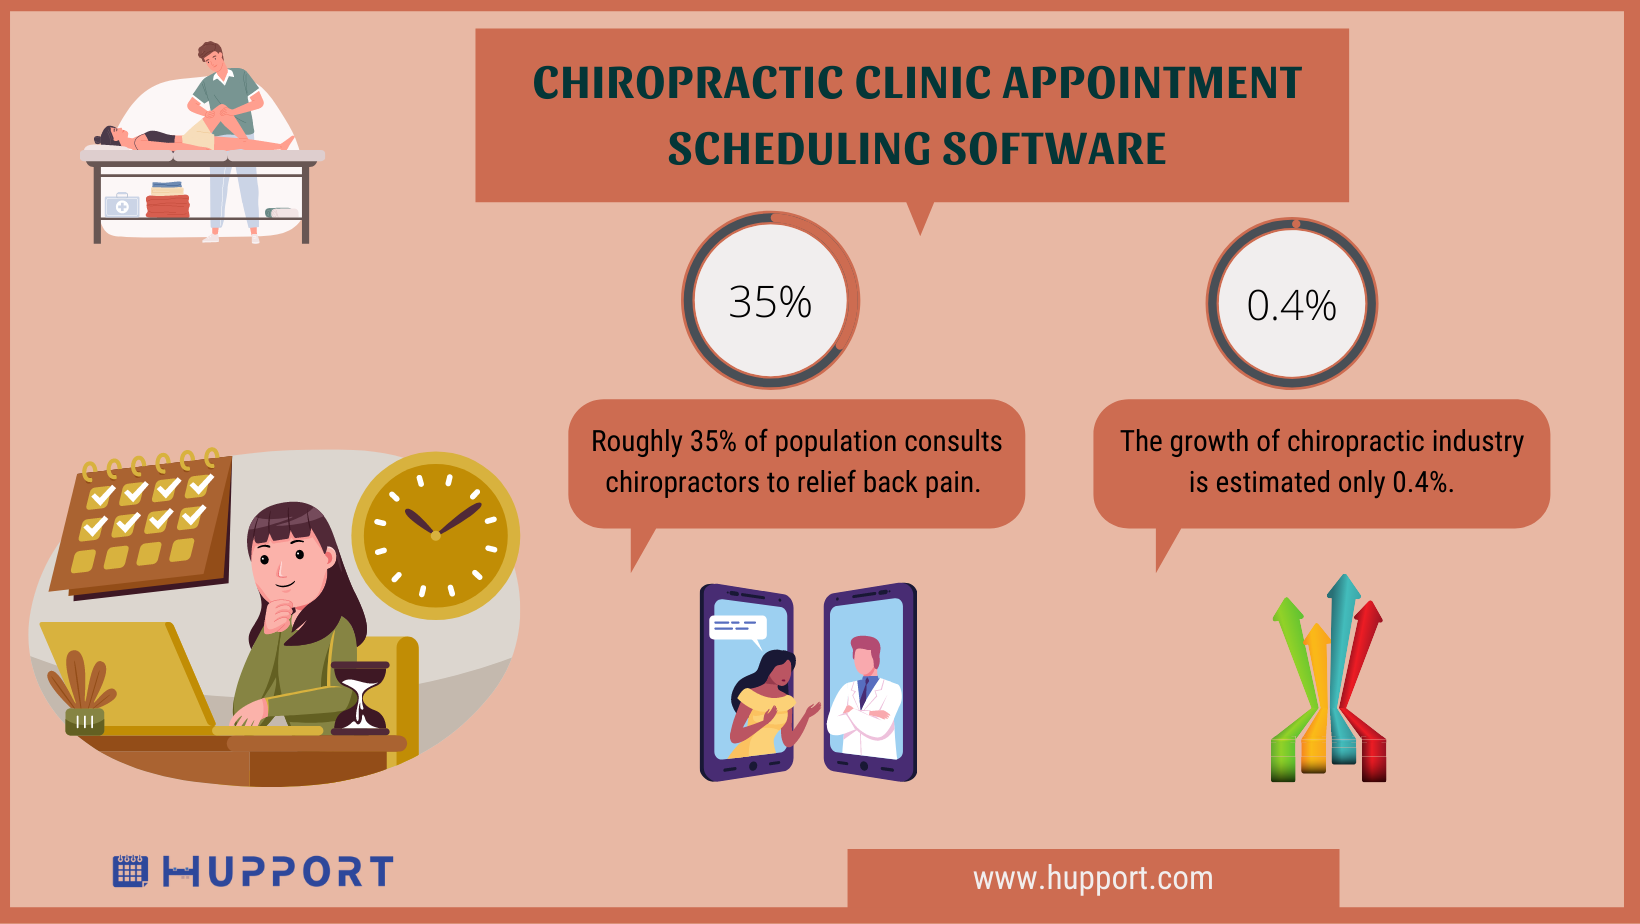 Chiropractic clinic appointment scheduling software